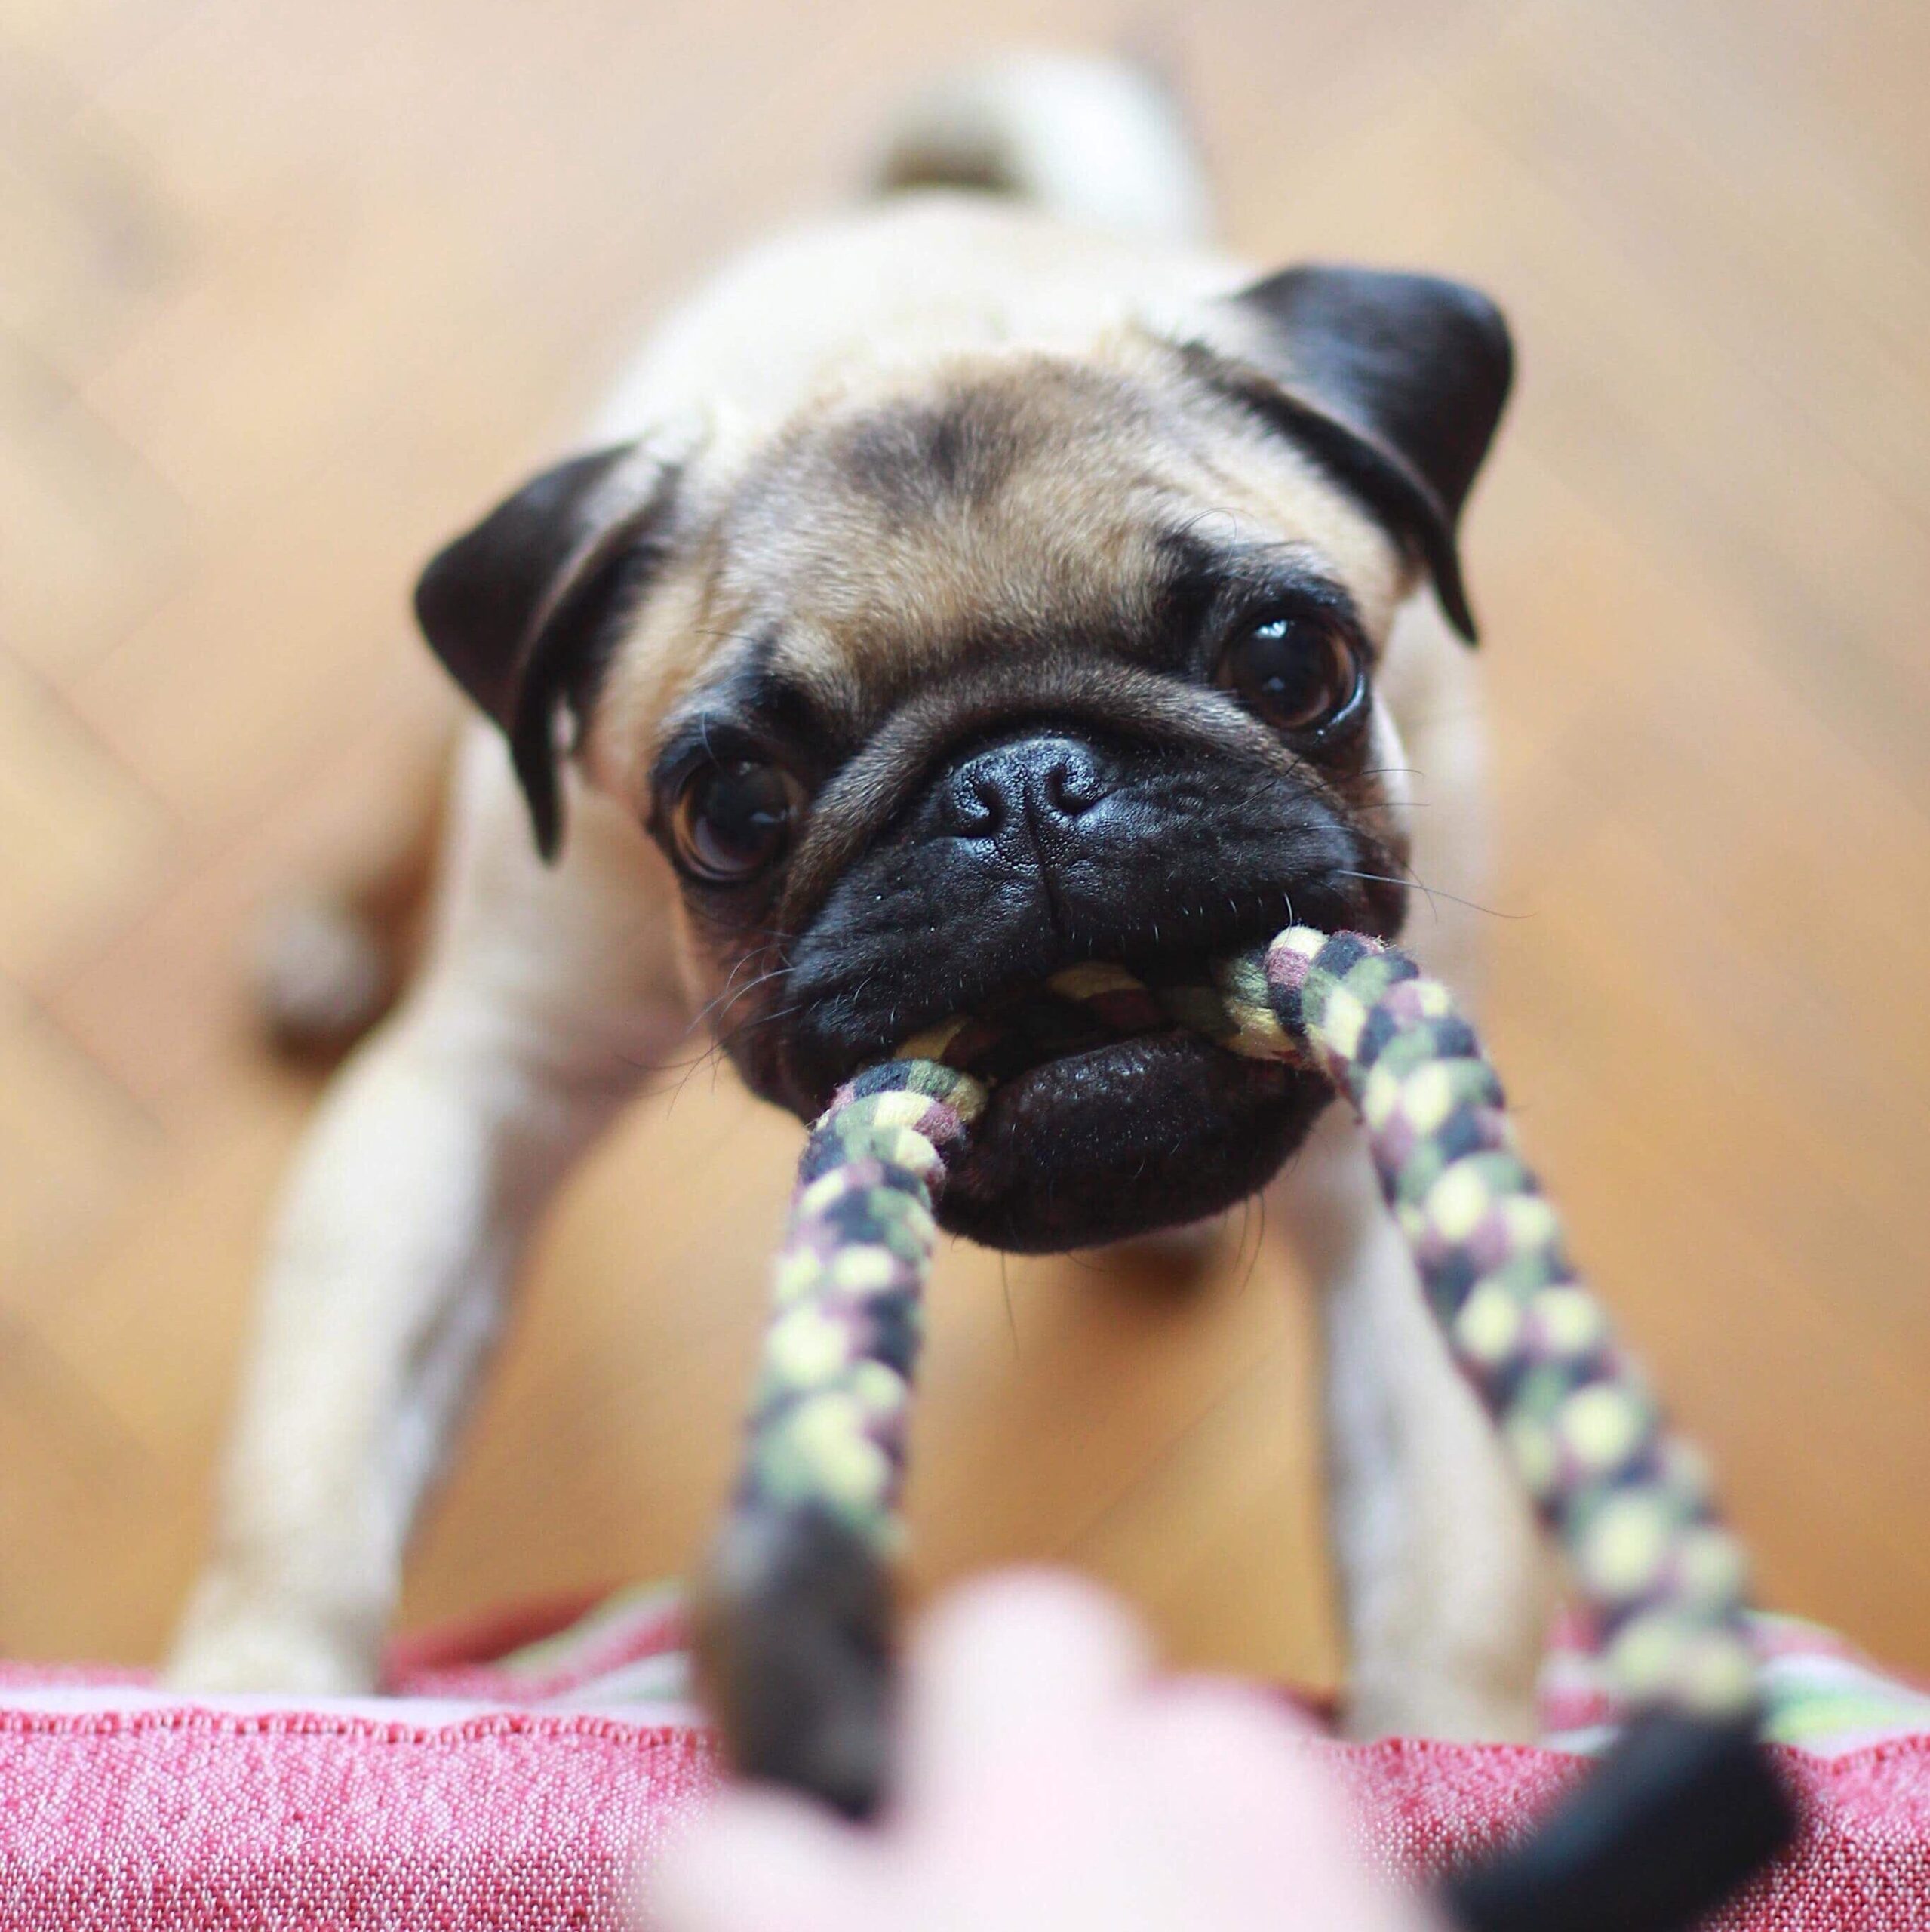 picture of a pug type dog tugging on a rope toy